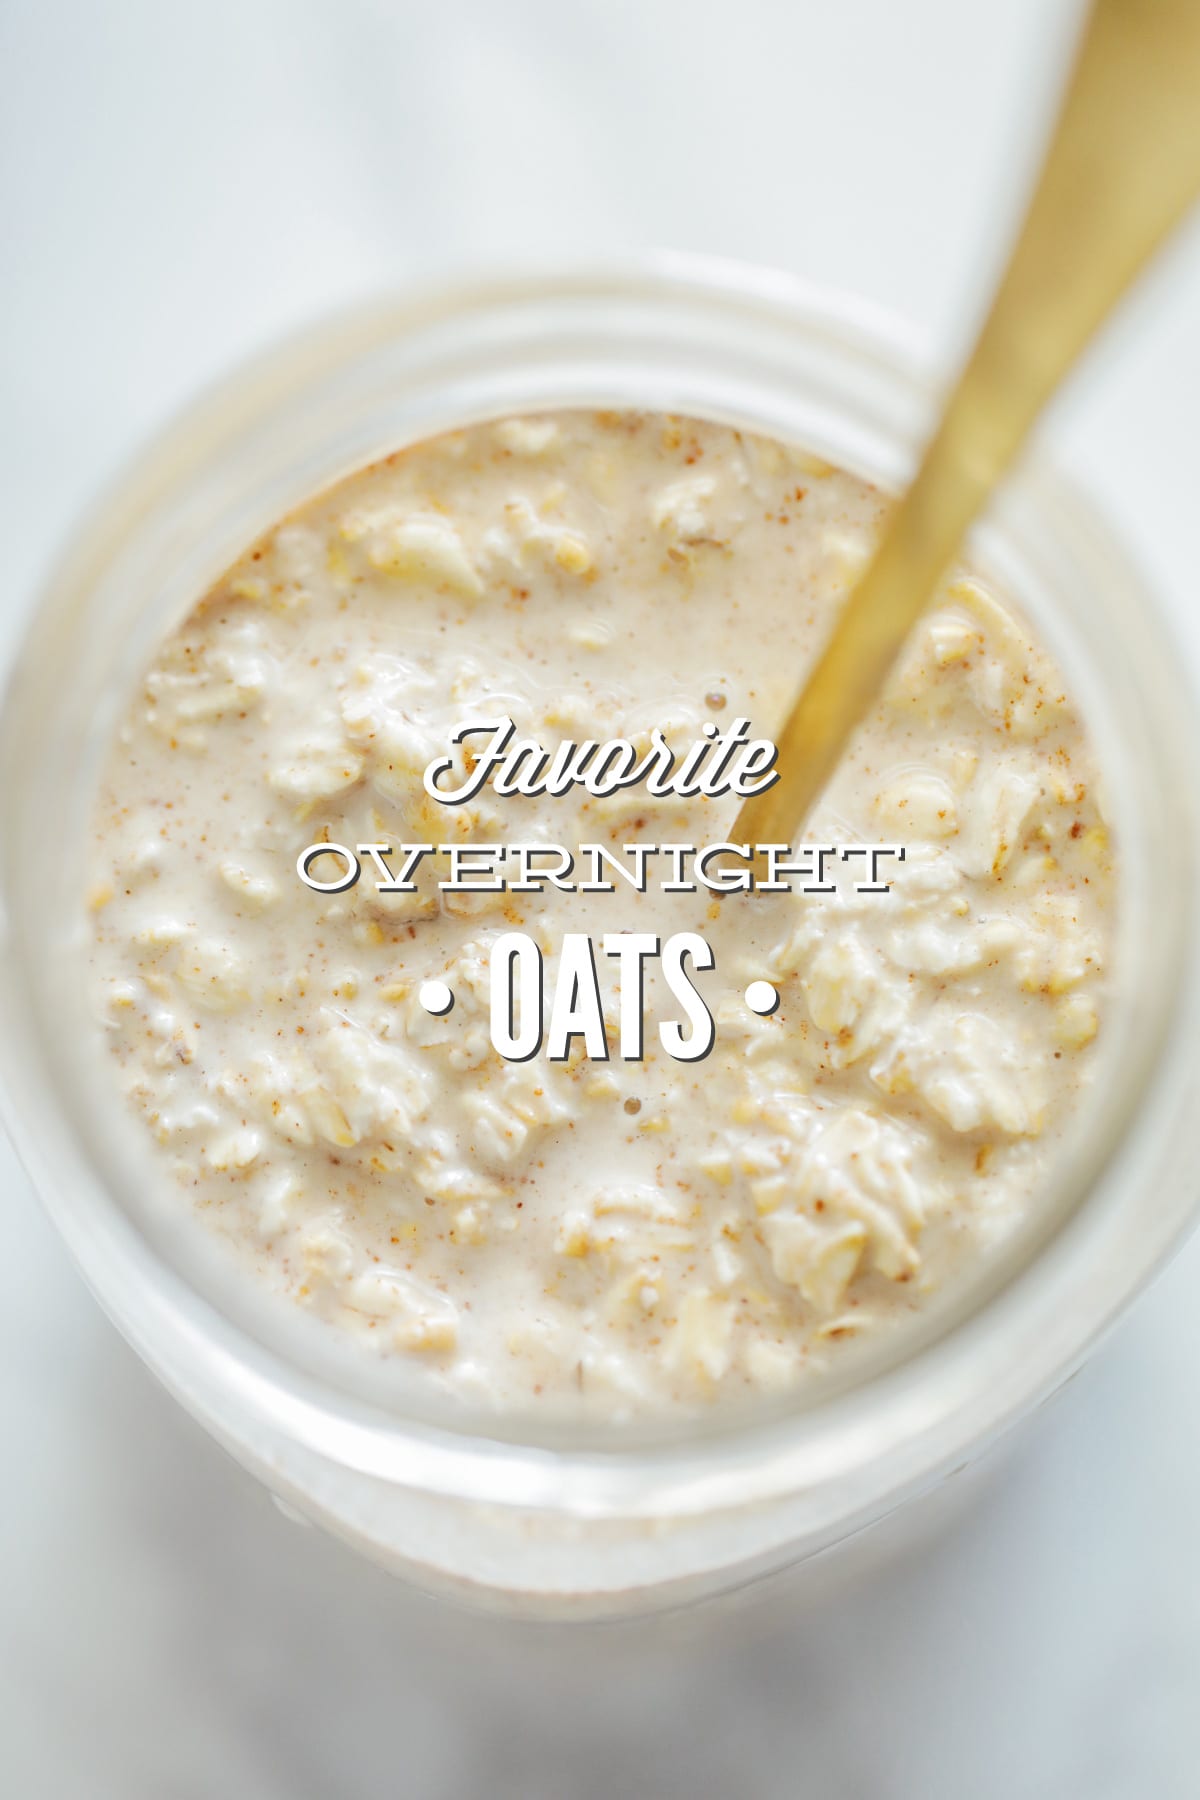 My Favorite Overnight Oats (Meal Prep Option)